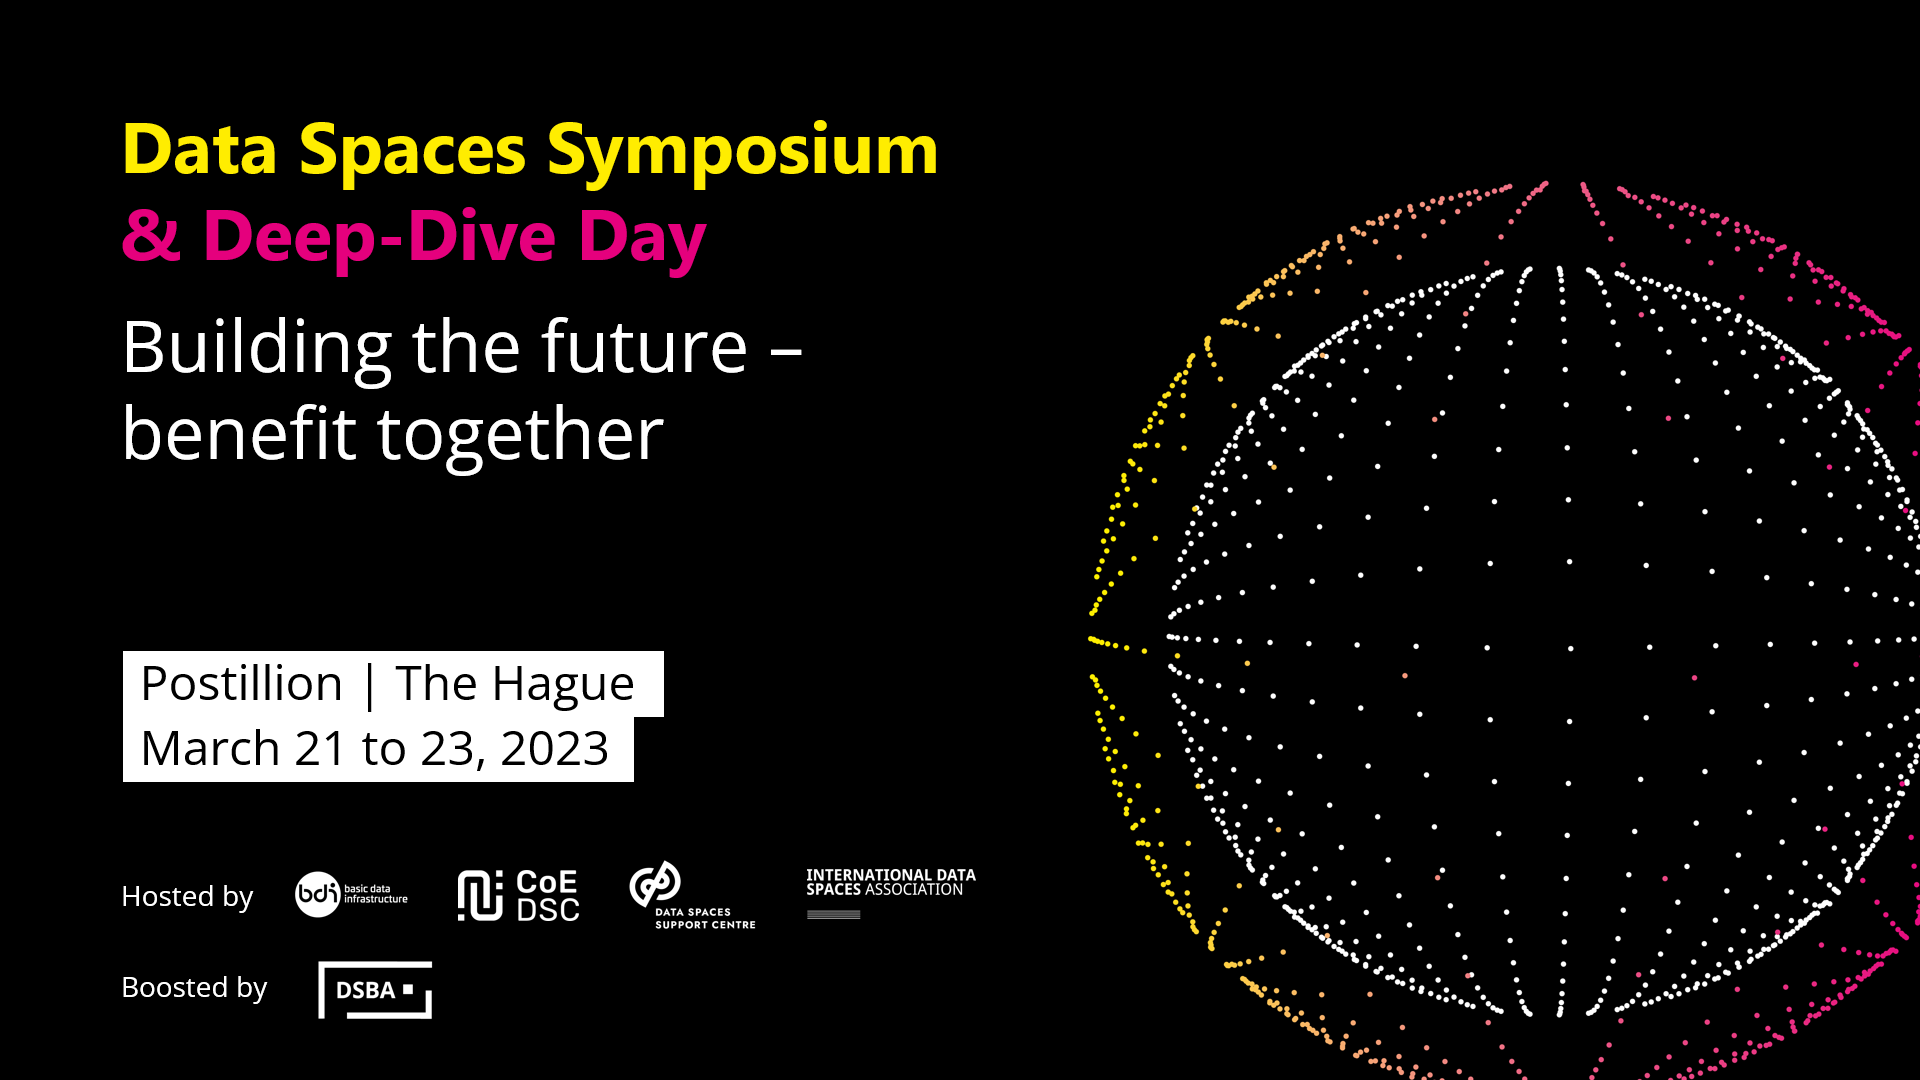 Data Spaces Symposium & Deep-Dive Day | Building the future – benefit together